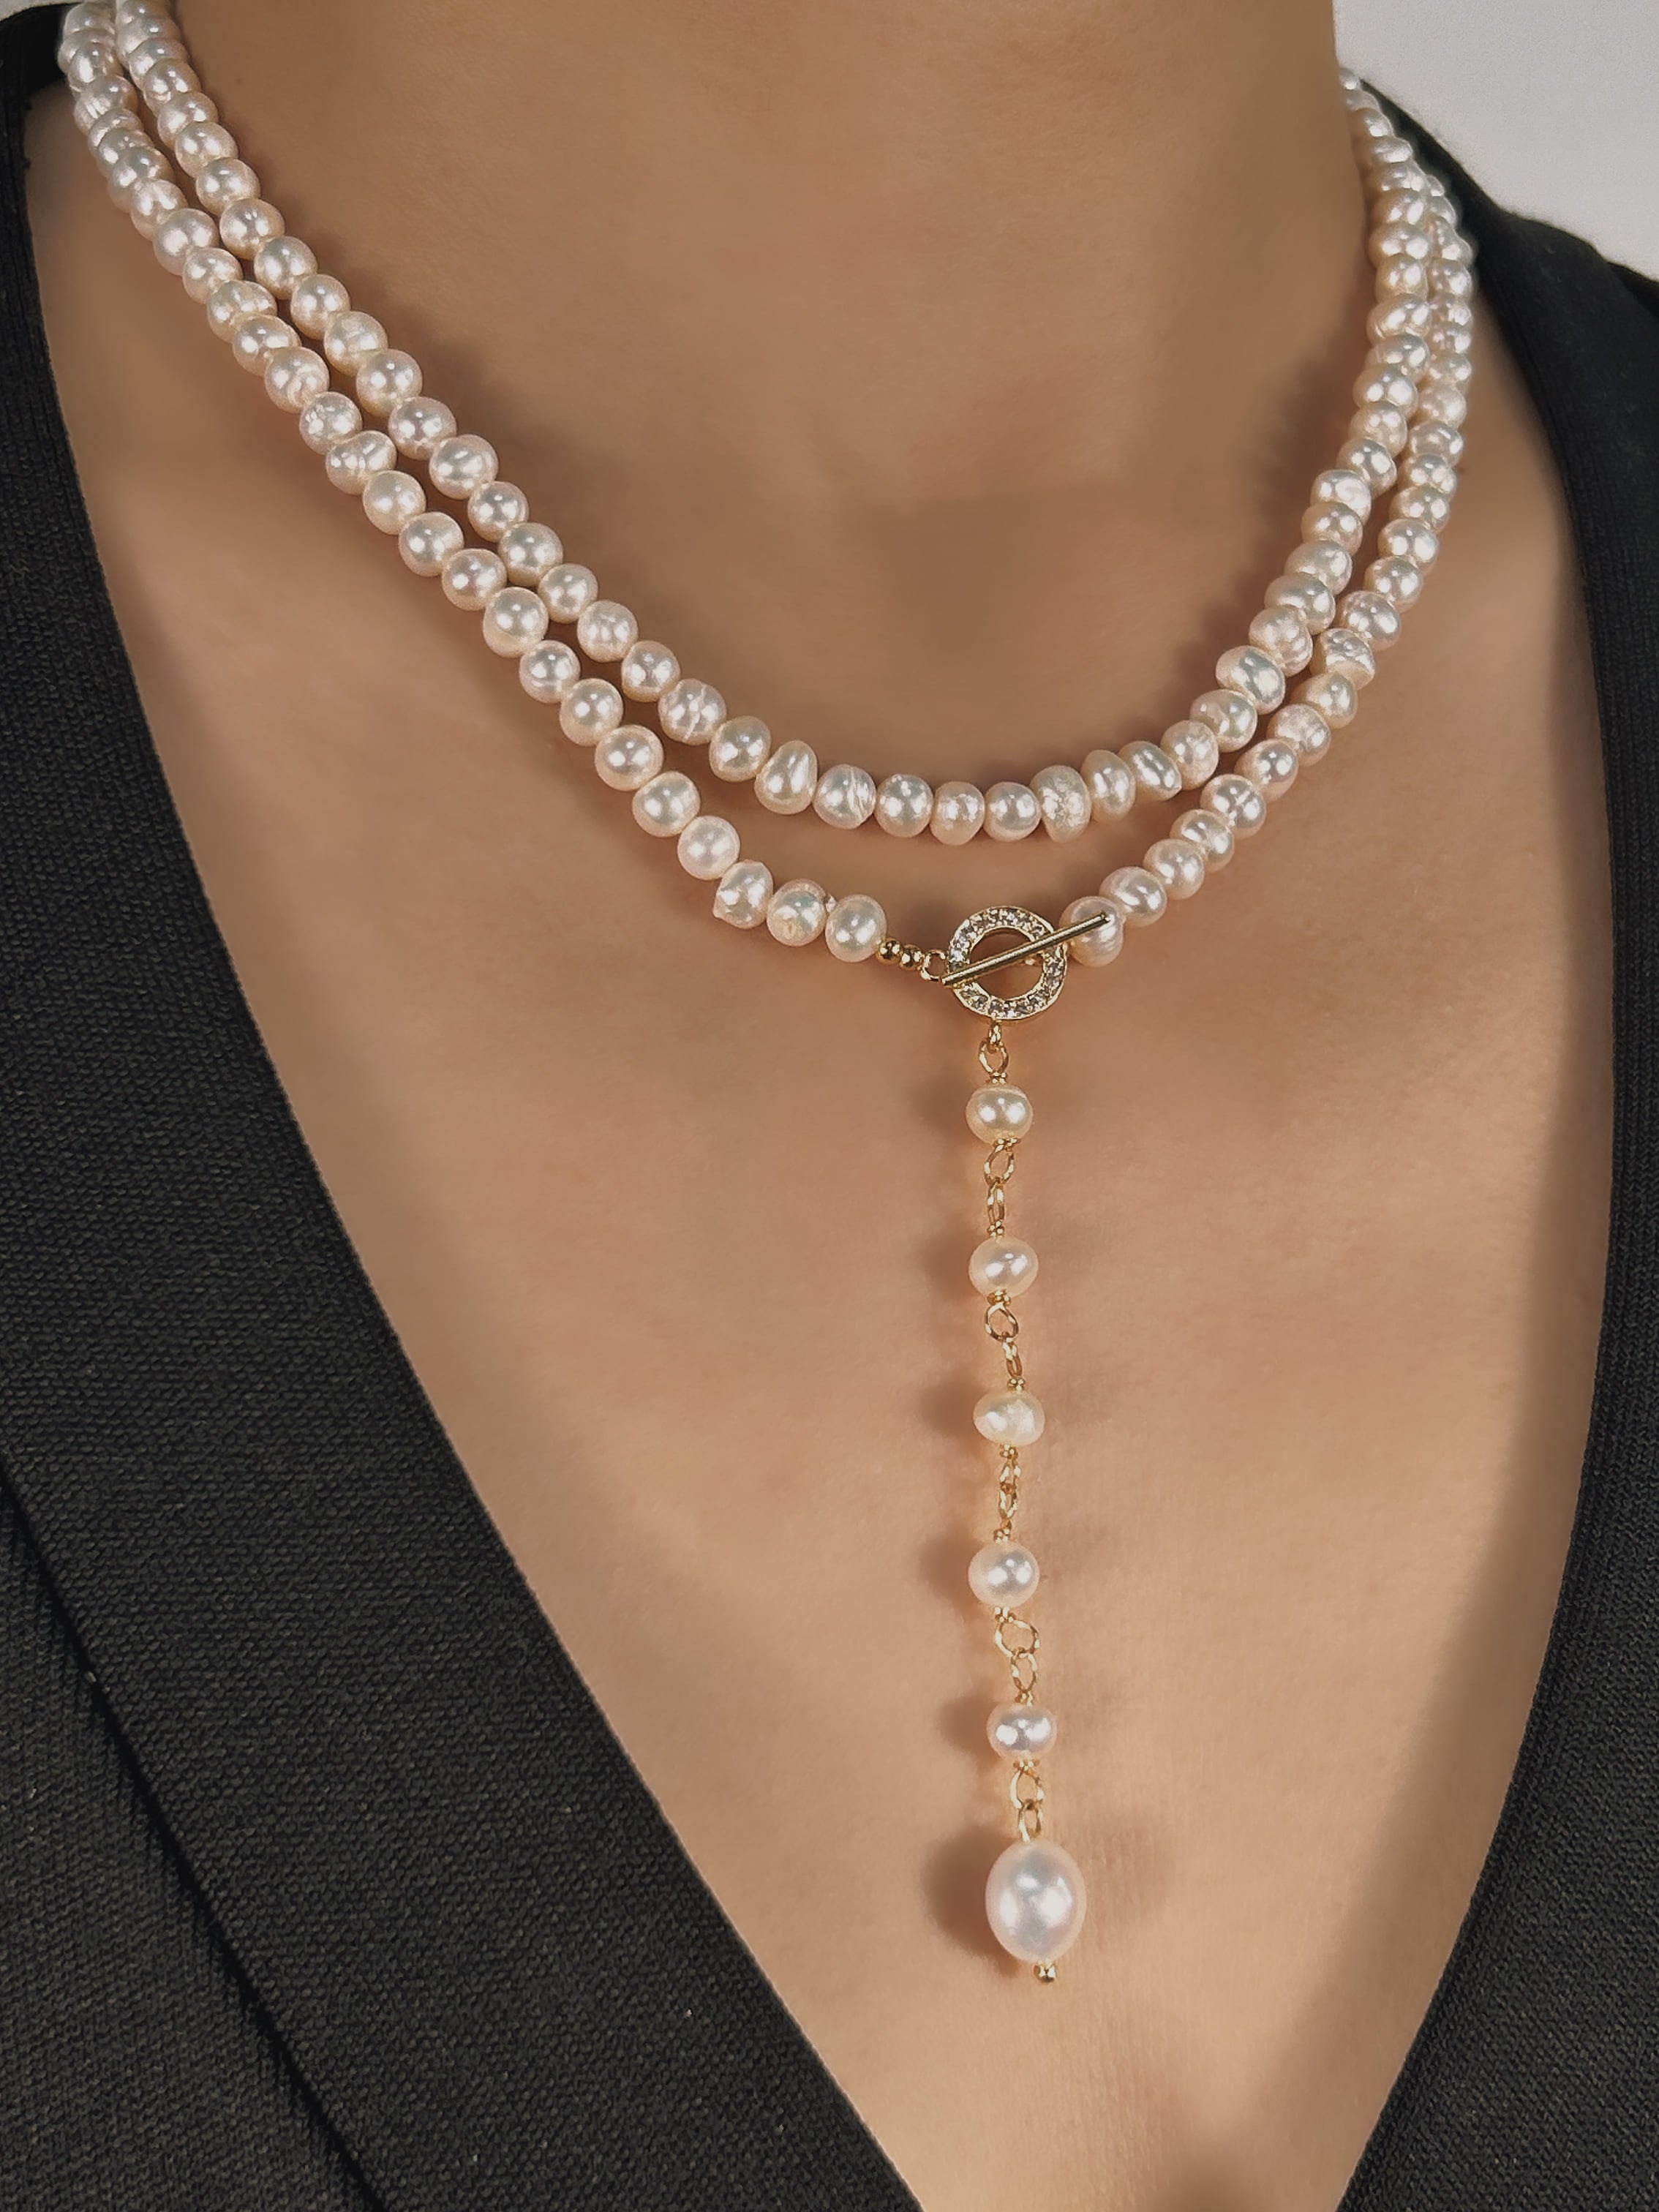 Genuine Freshwater Pearl Éblouissant Elf Tail Necklace